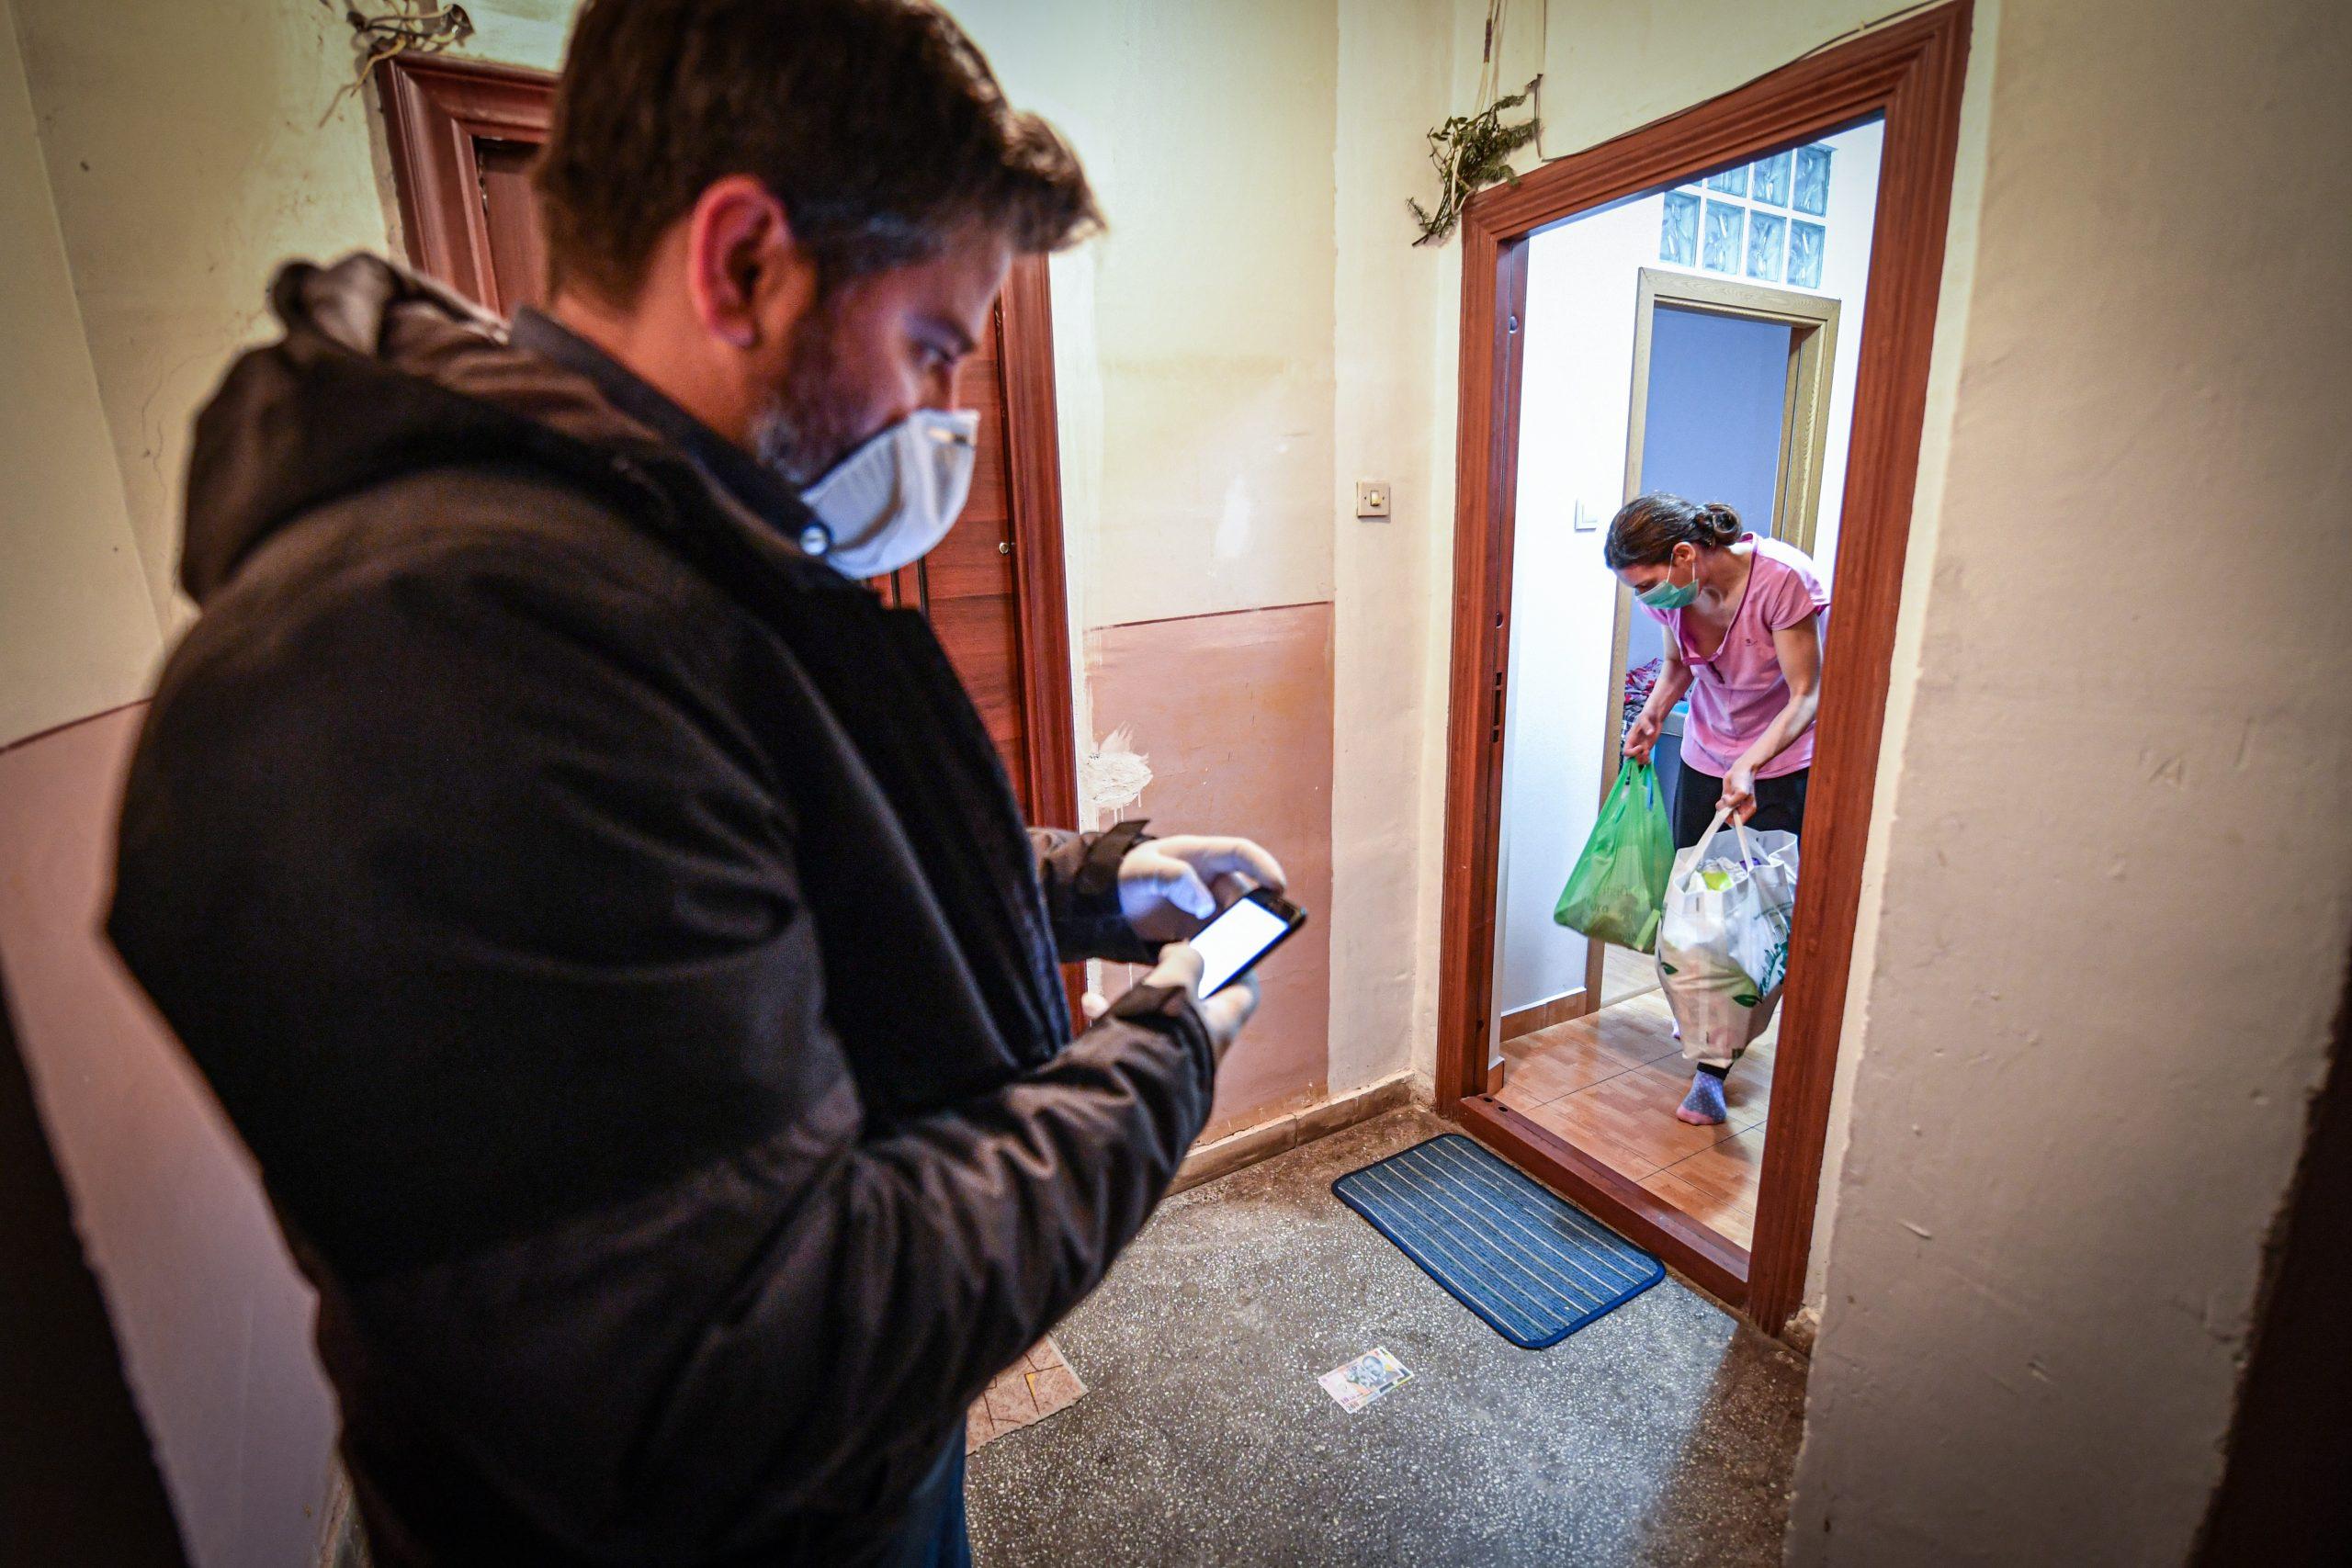 A man checks his phone for new calls for help, as he delivers shopping to a young mother who stays confined at her home due to the novel coronavirus epidemic on March 15, 2020 in Bucharest. Photo: AFP